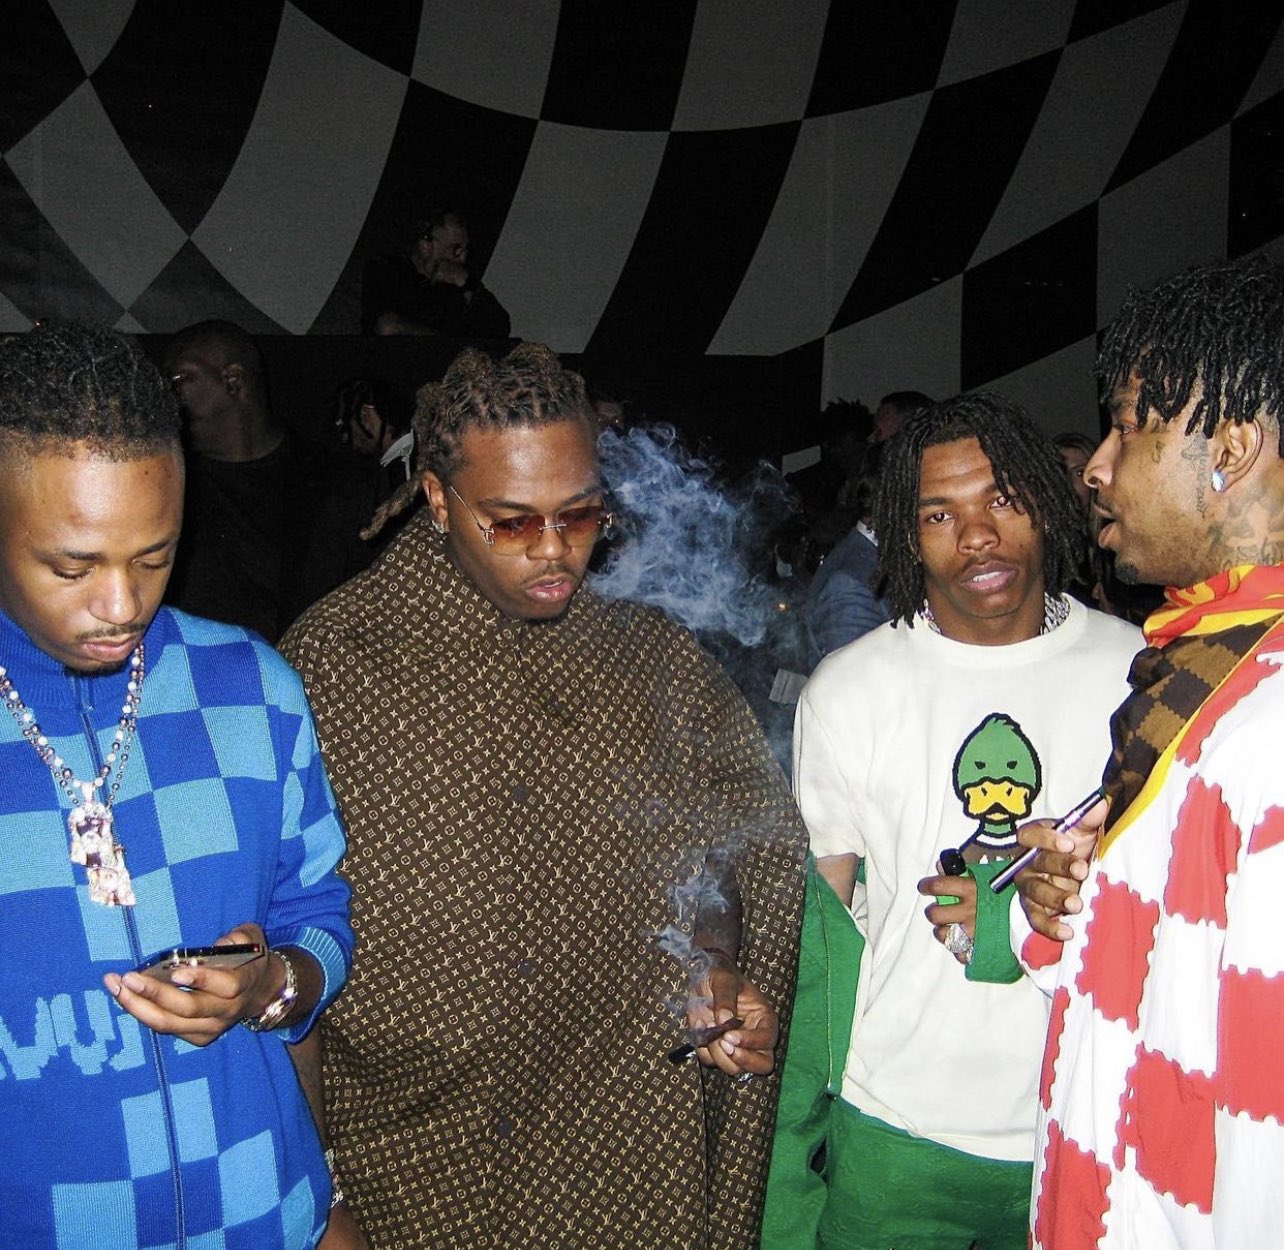 The Source Magazine on X: Gunna, 21 Savage, Ye, Lil Baby, Metro Boomin  attend Virgil Abloh's last LV collection at Art Basel✨✨✨🕊 #VirgilWasHere   / X